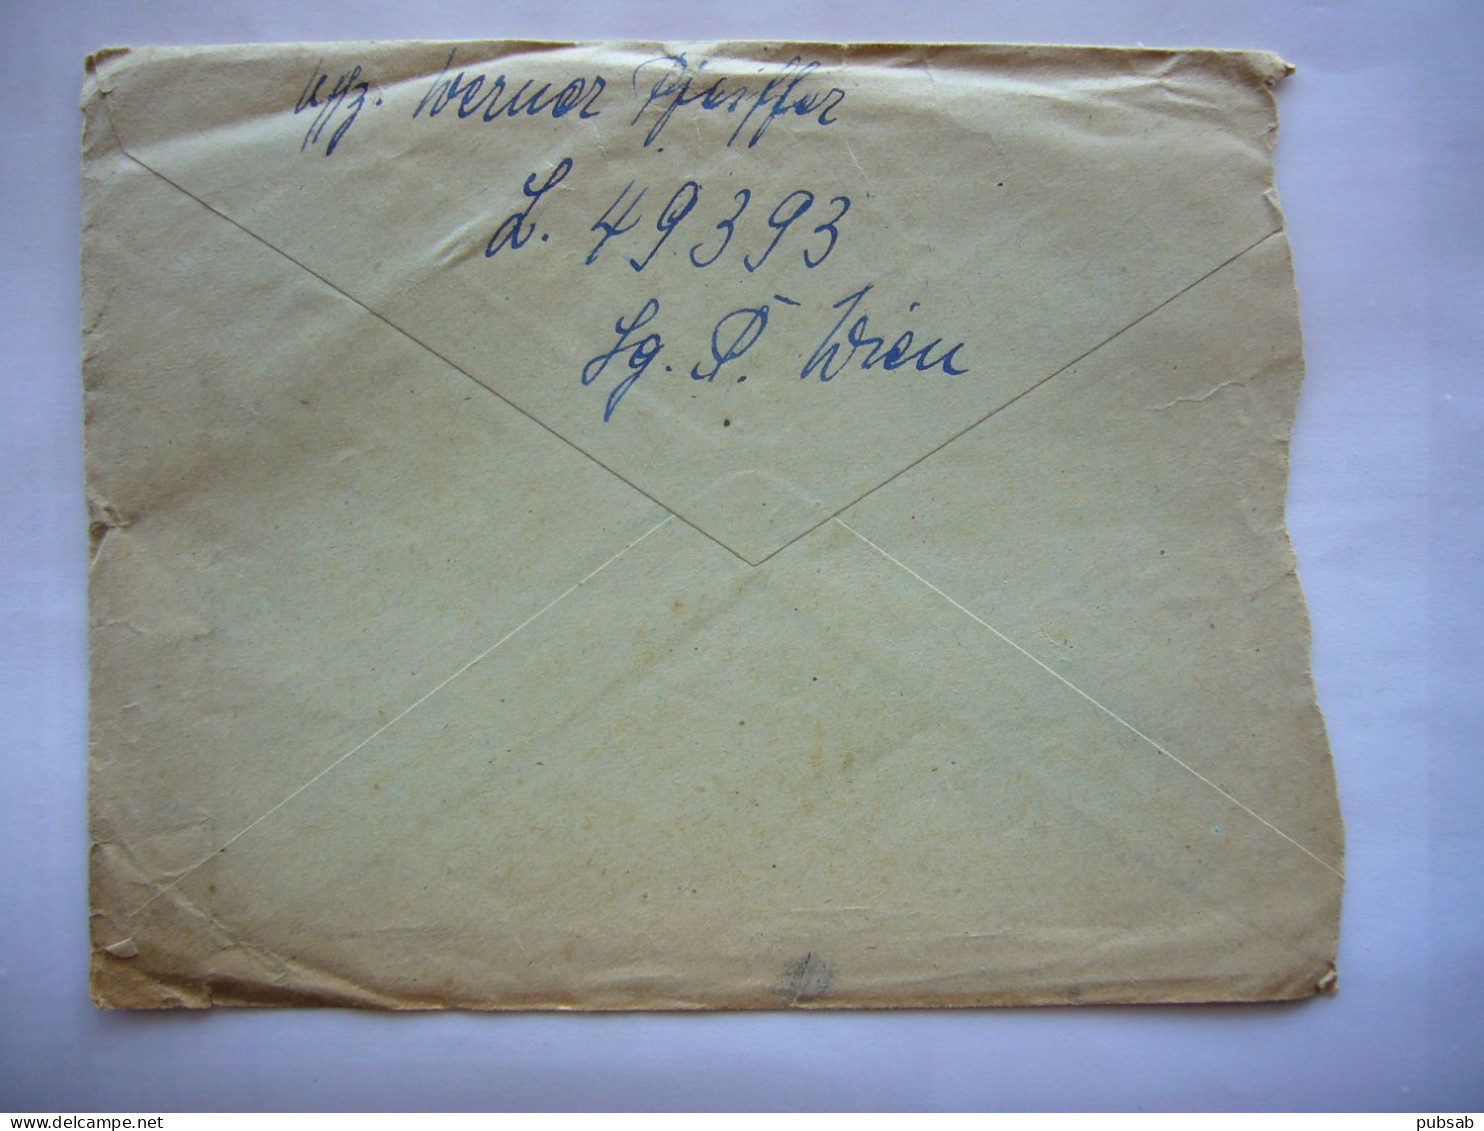 Avion / Airplane / 4th Air Mail Round Up / From Canton, Ohio To Columbus, Ohio / Apr 20,1944 At Ll,30 PM - 2c. 1941-1960 Covers